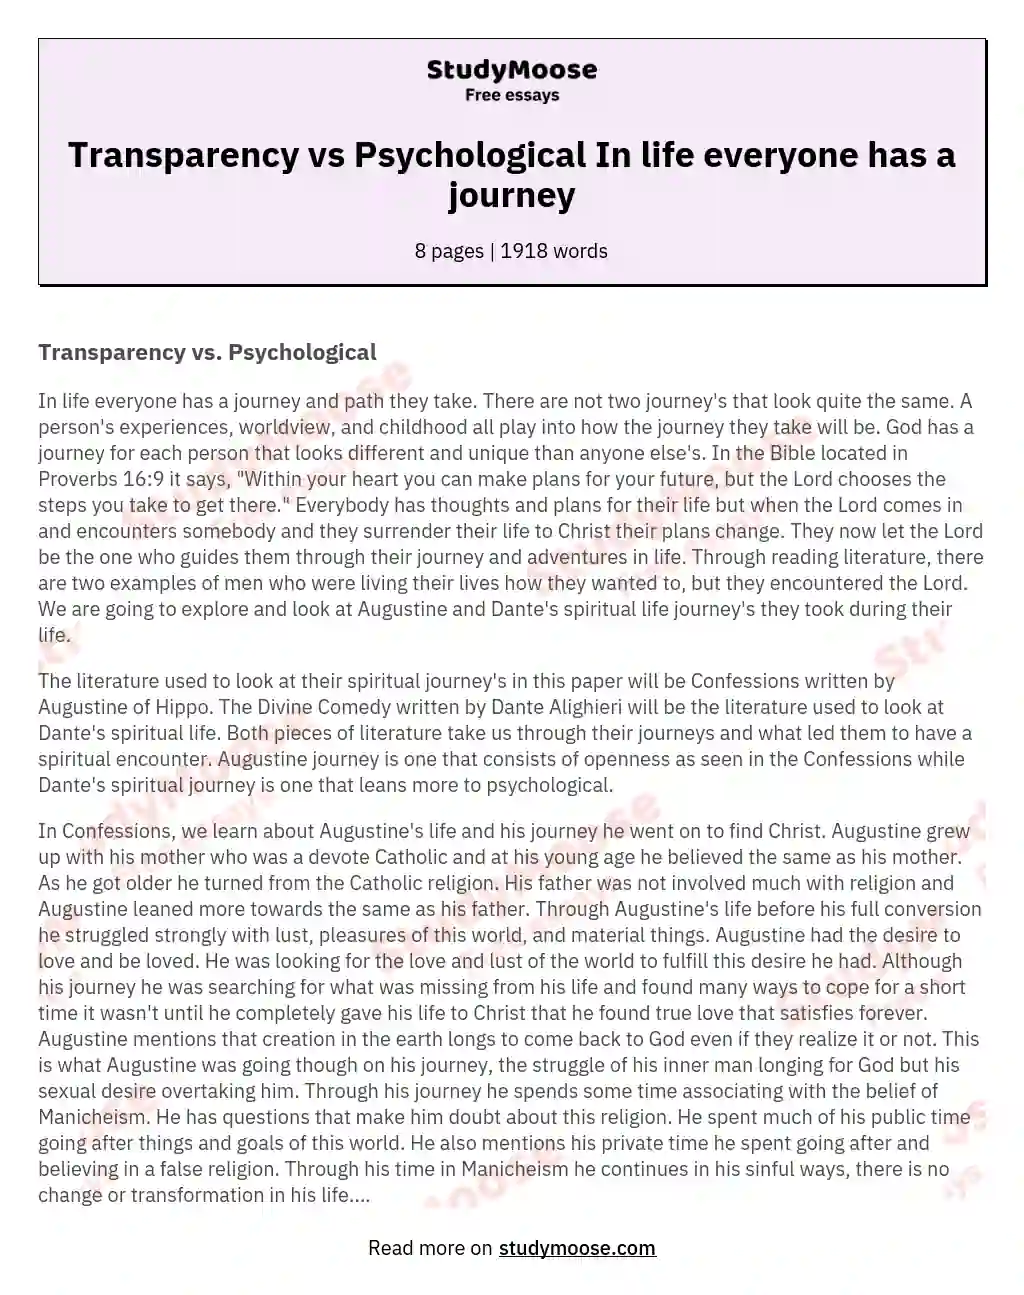 Transparency vs Psychological In life everyone has a journey